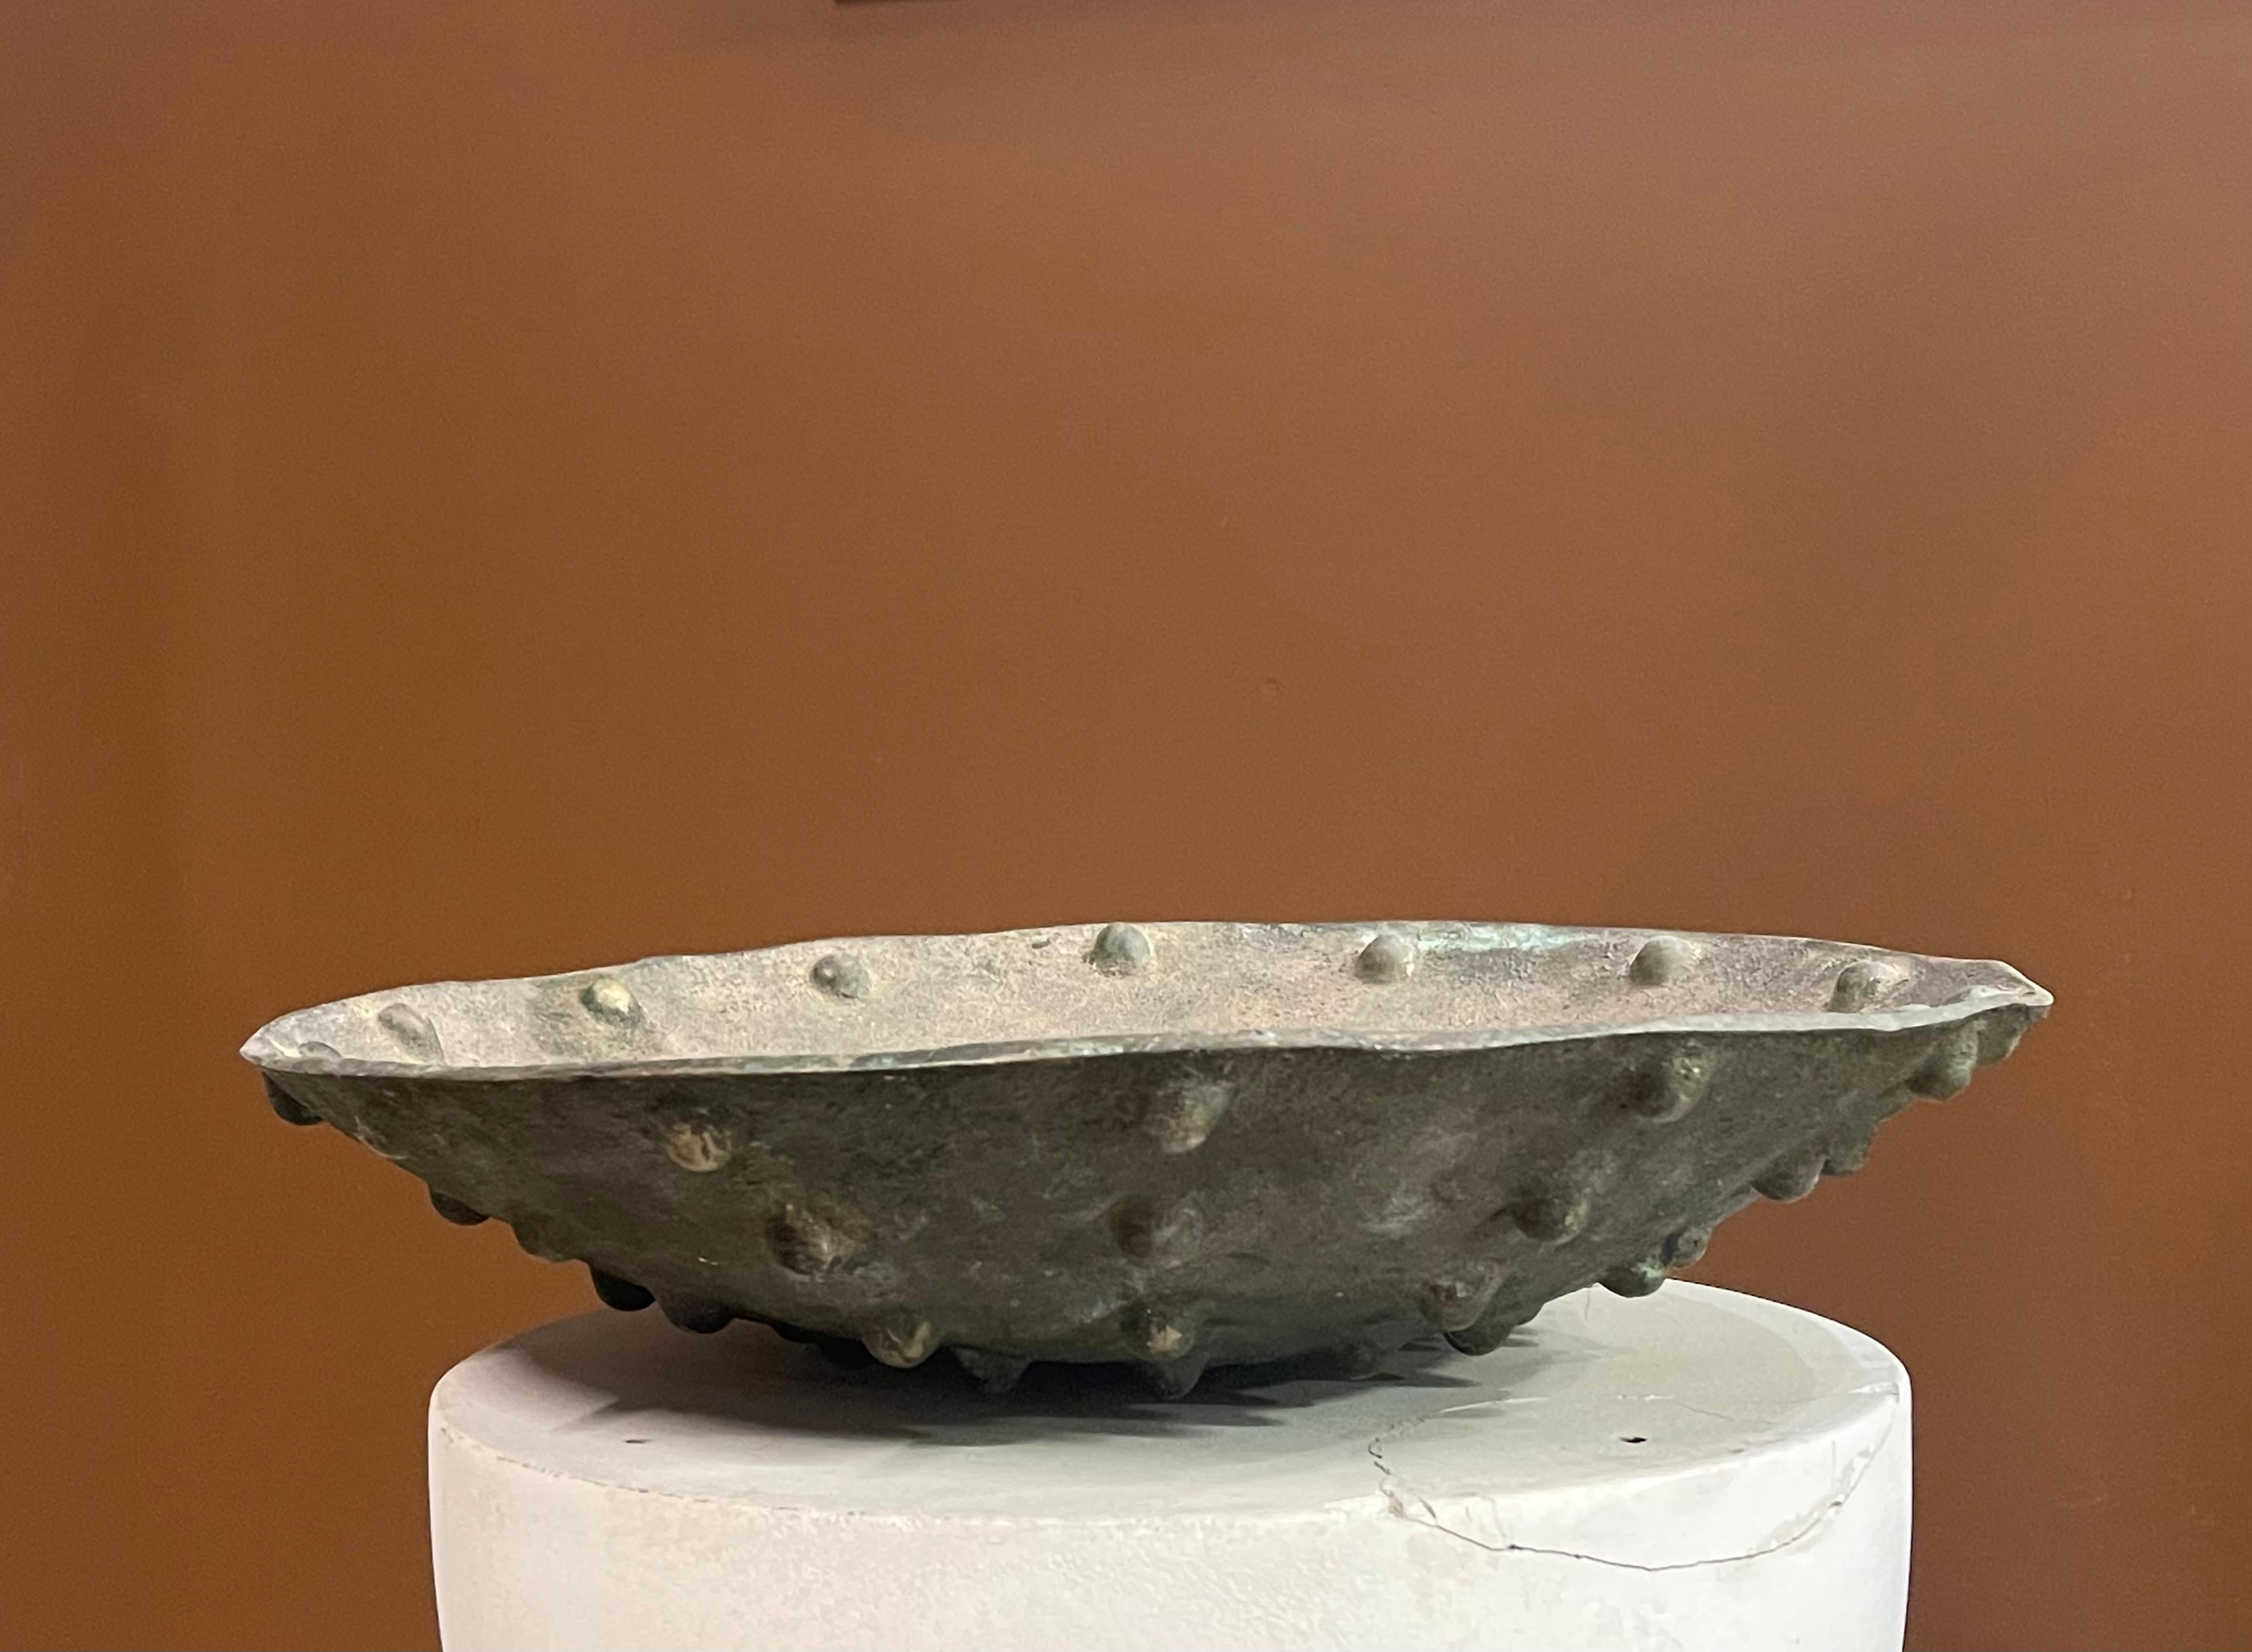 A beautiful bronze sculptural bowl heavily tarnished with an 18 inch diameter and 4 inches tall.